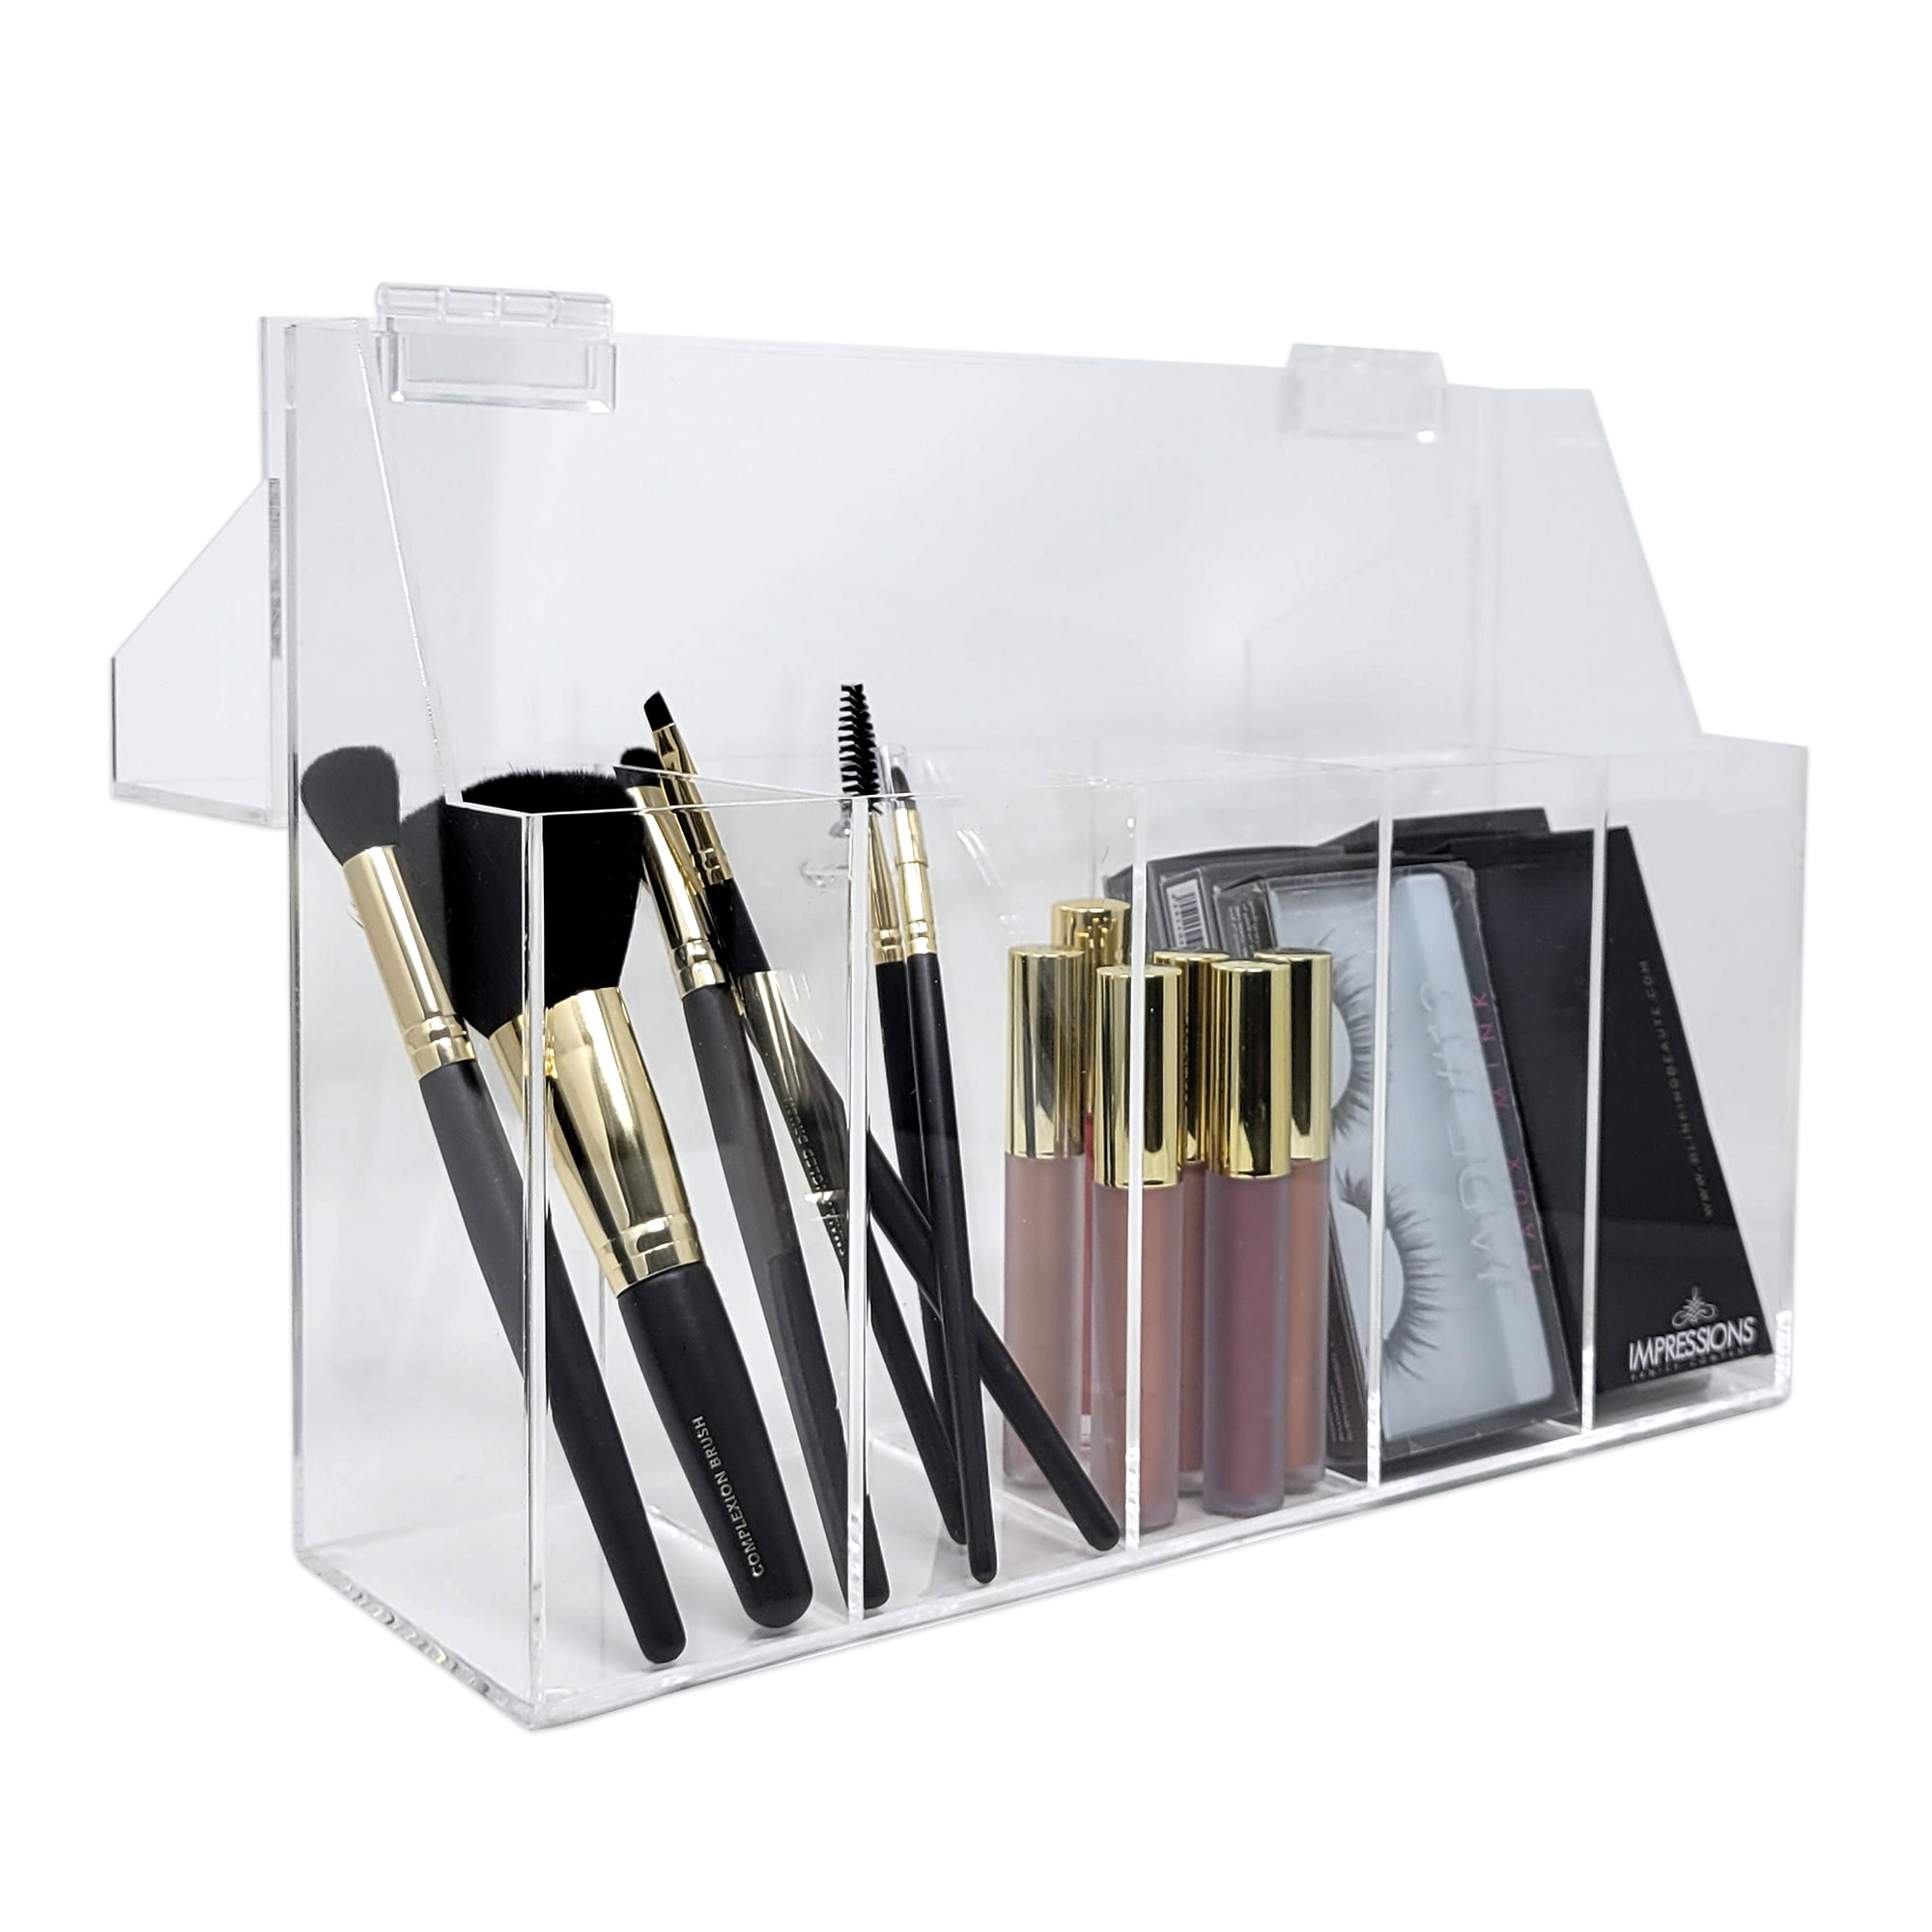 How I Organize My Makeup In My Vanity - The Fancy Things